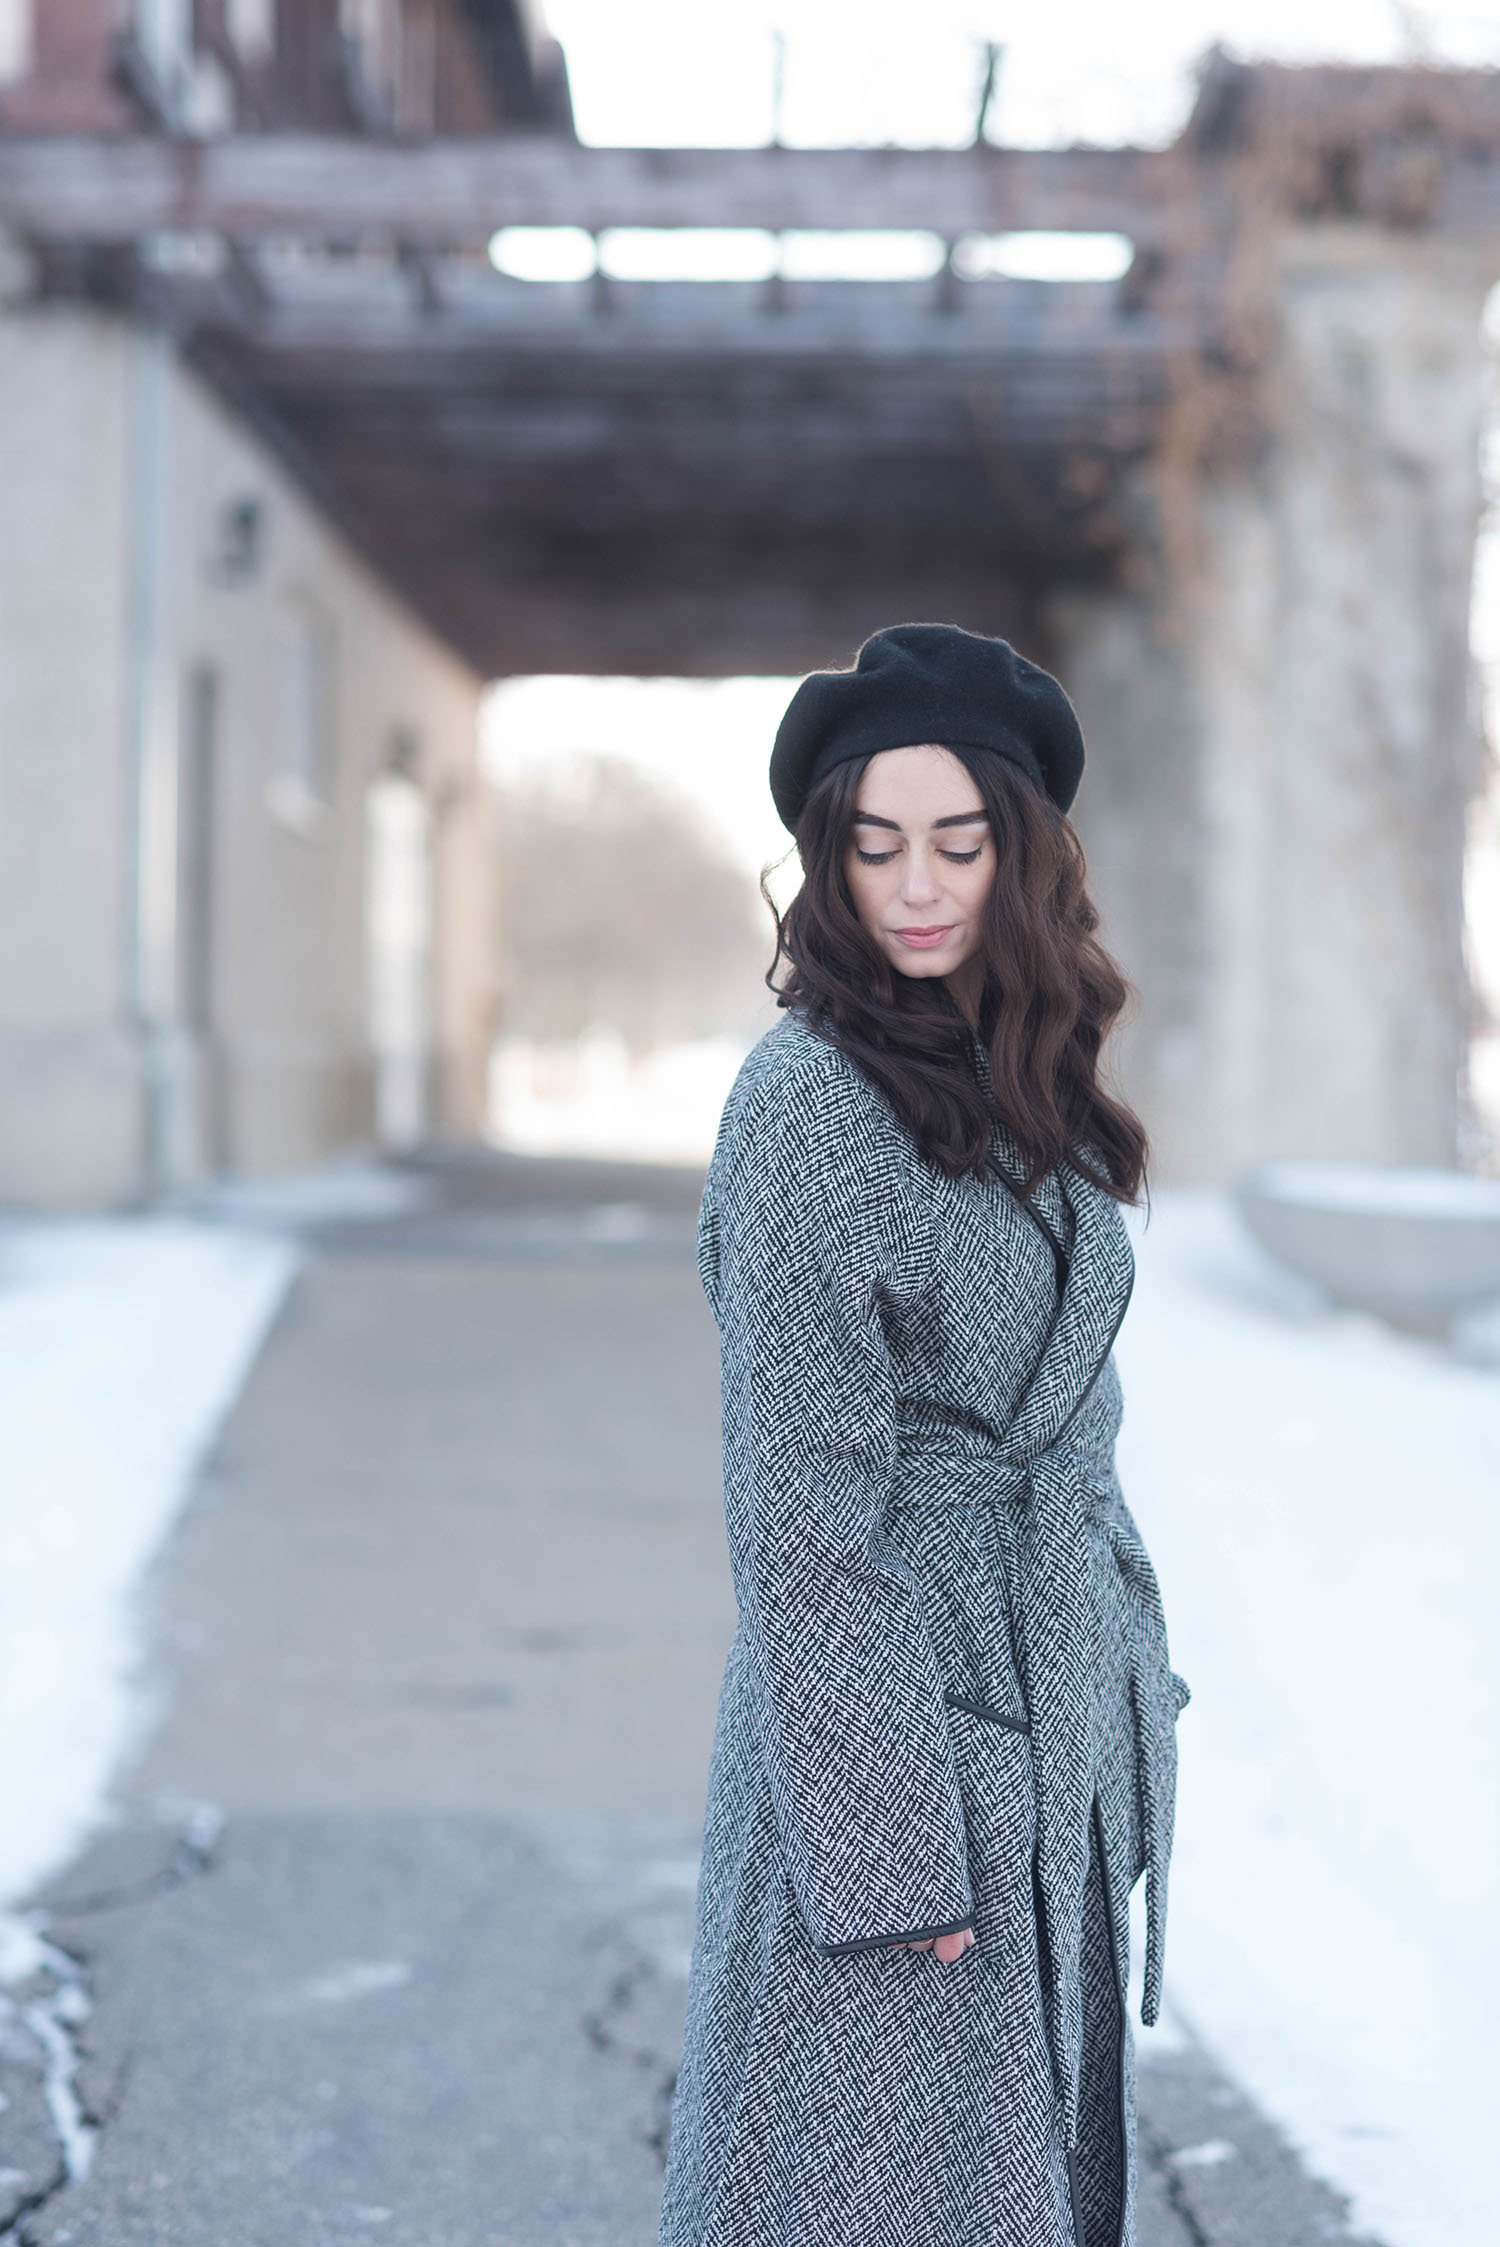 Portrait of Canadian fashion blogger Cee Fardoe of Coco & Vera, wearing an Anthropologie Bonnie beret and Lovers + Friends Monica coat